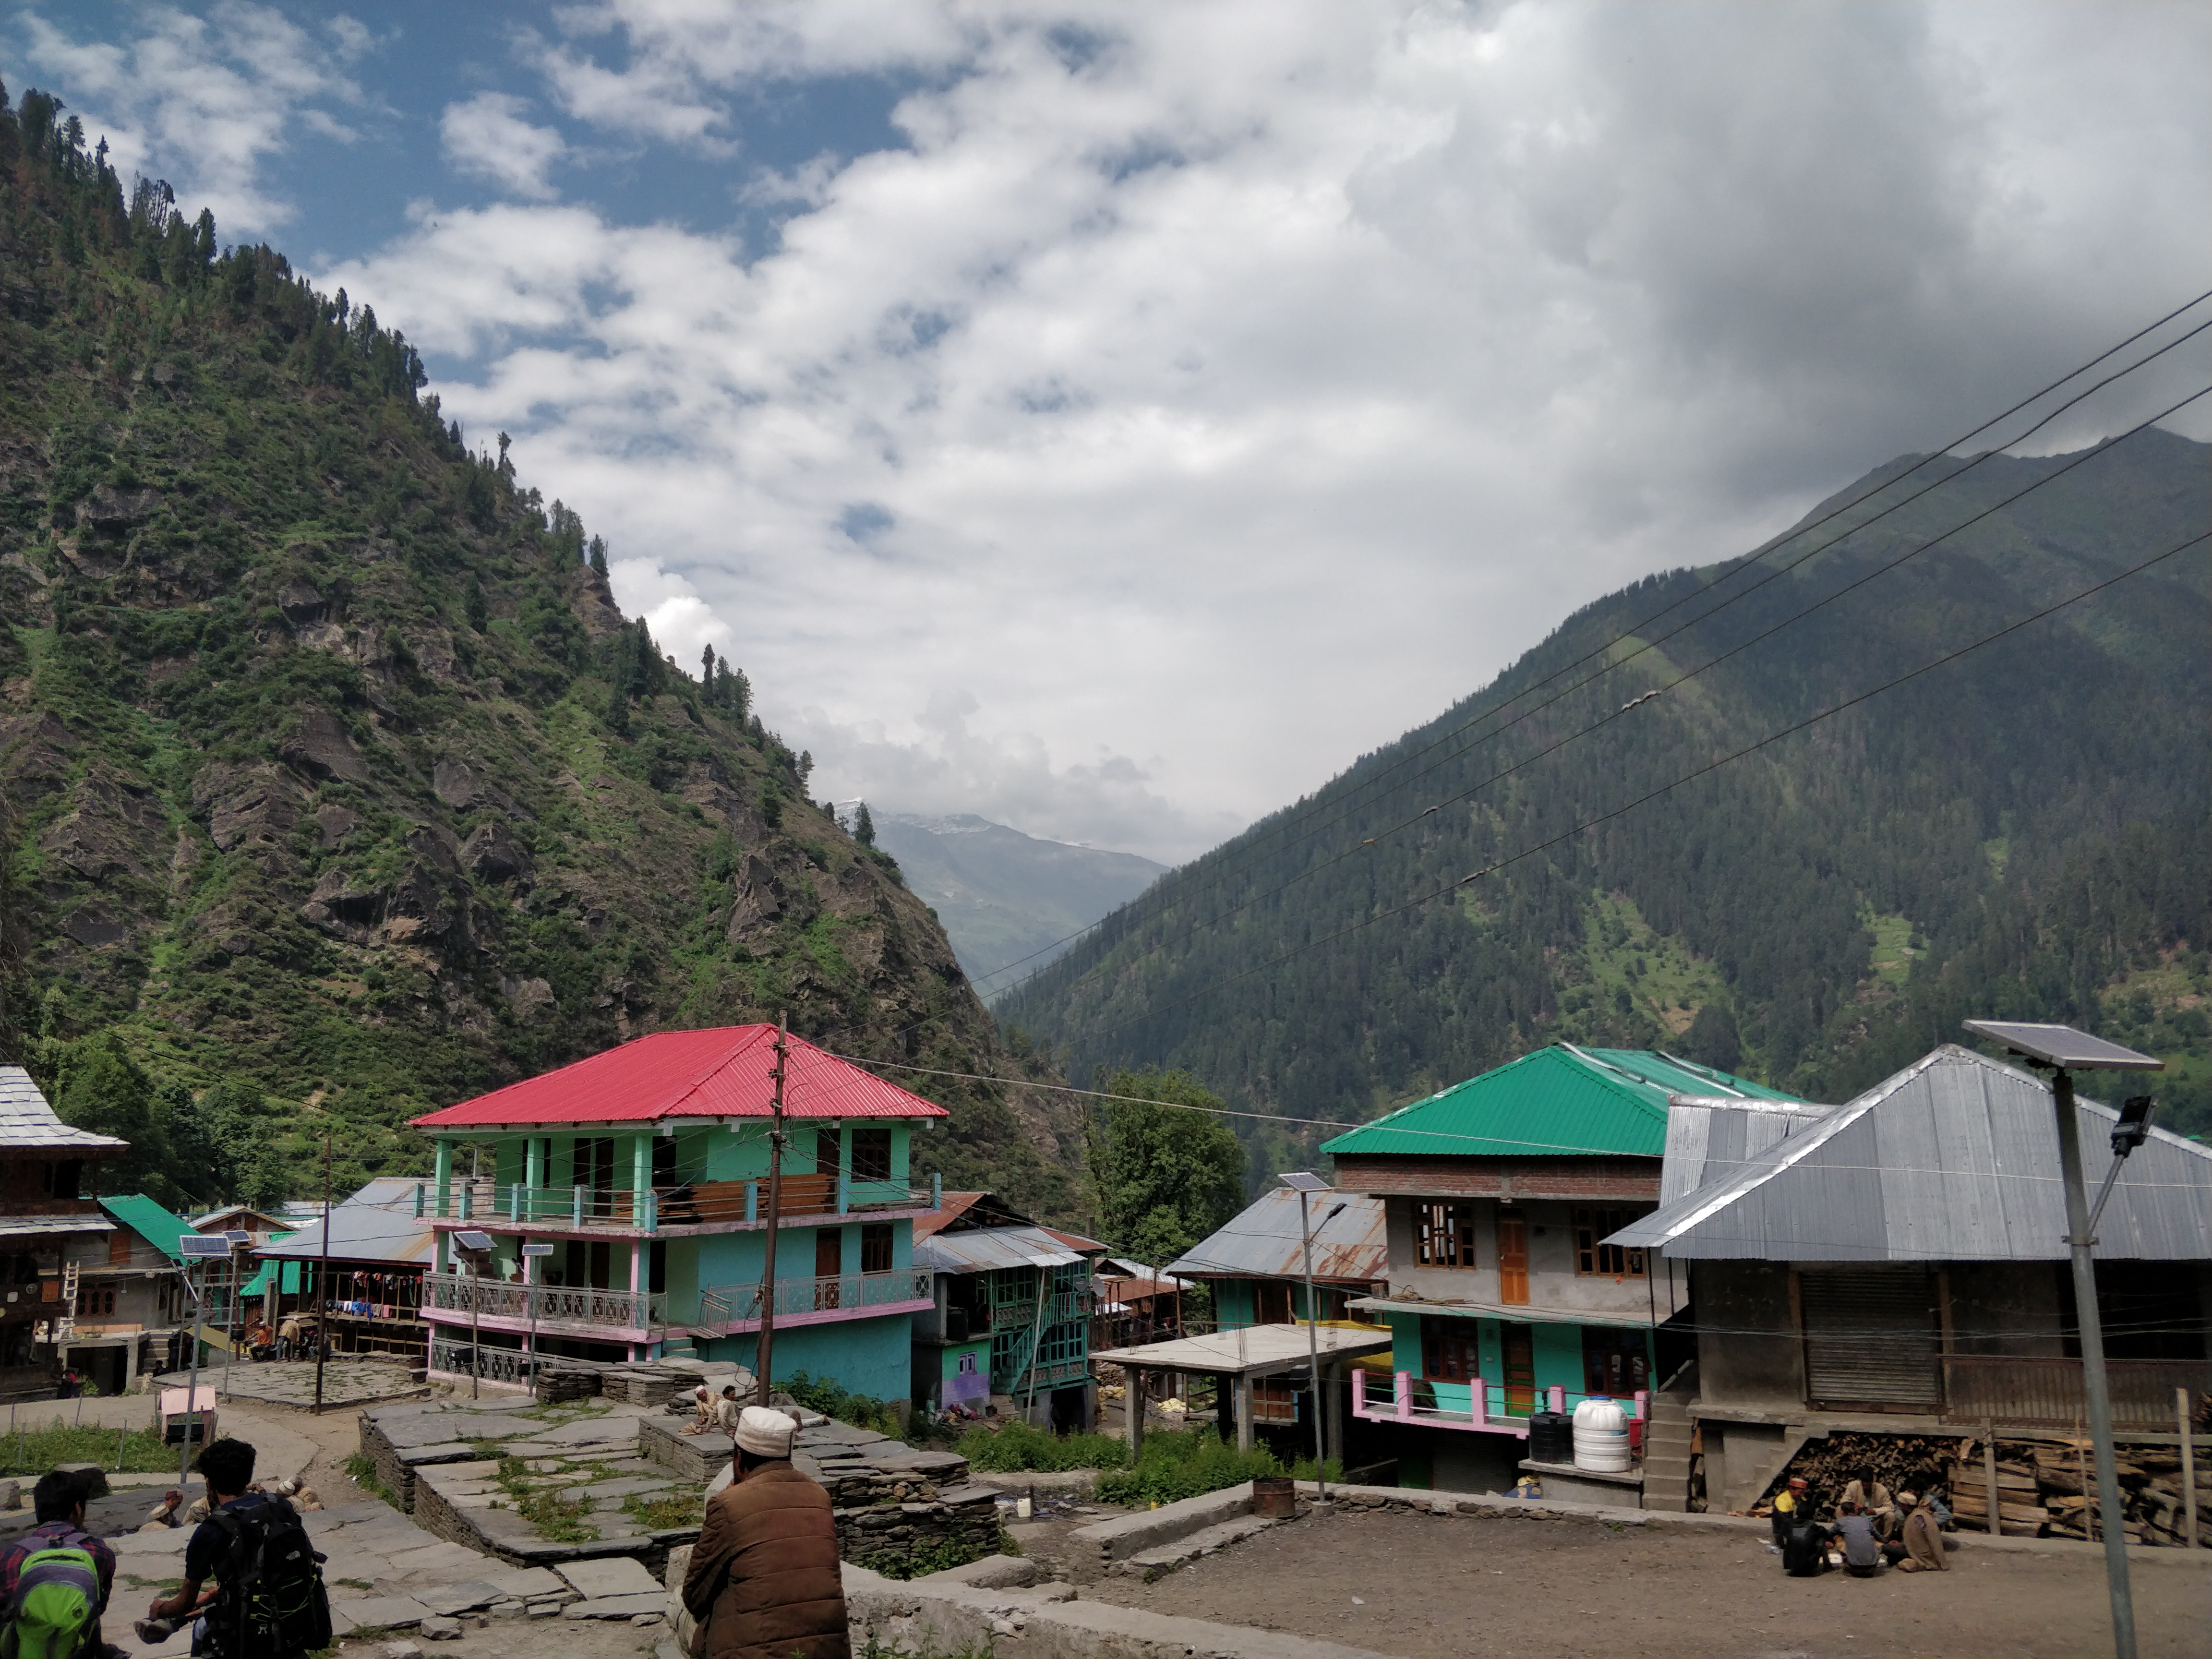 View of Malana villagein Himachal Pradesh, India; showing the local houses and residents.